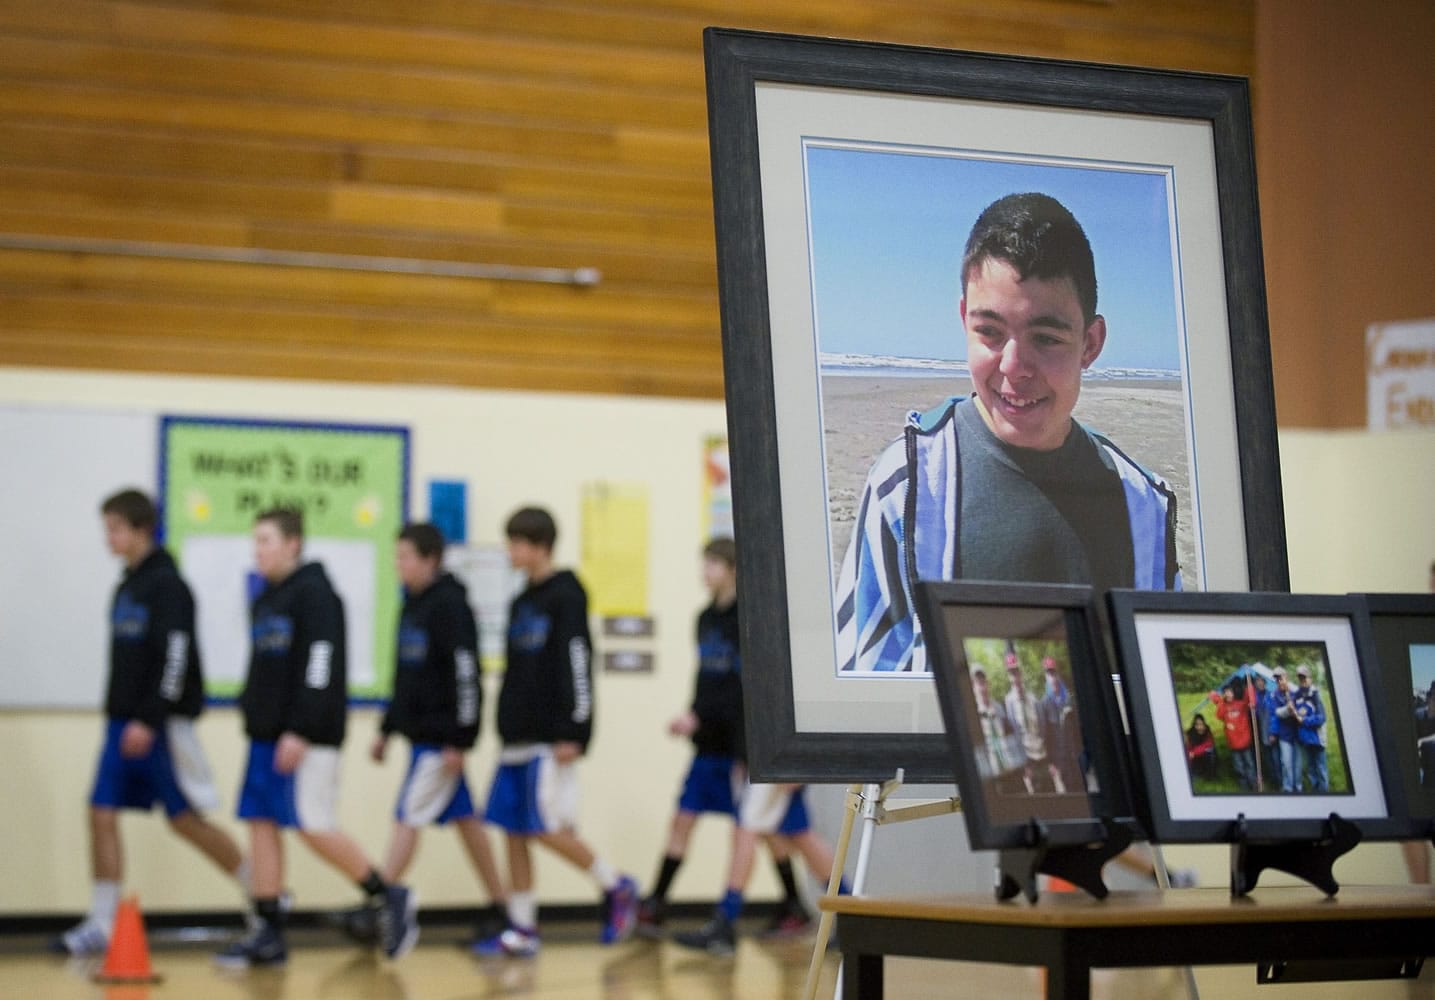 Members of the La Center Middle School's basketball team enter the gymnasium amid photographs of Cody Sherrell during a memorial ceremony at La Center Middle School in January.